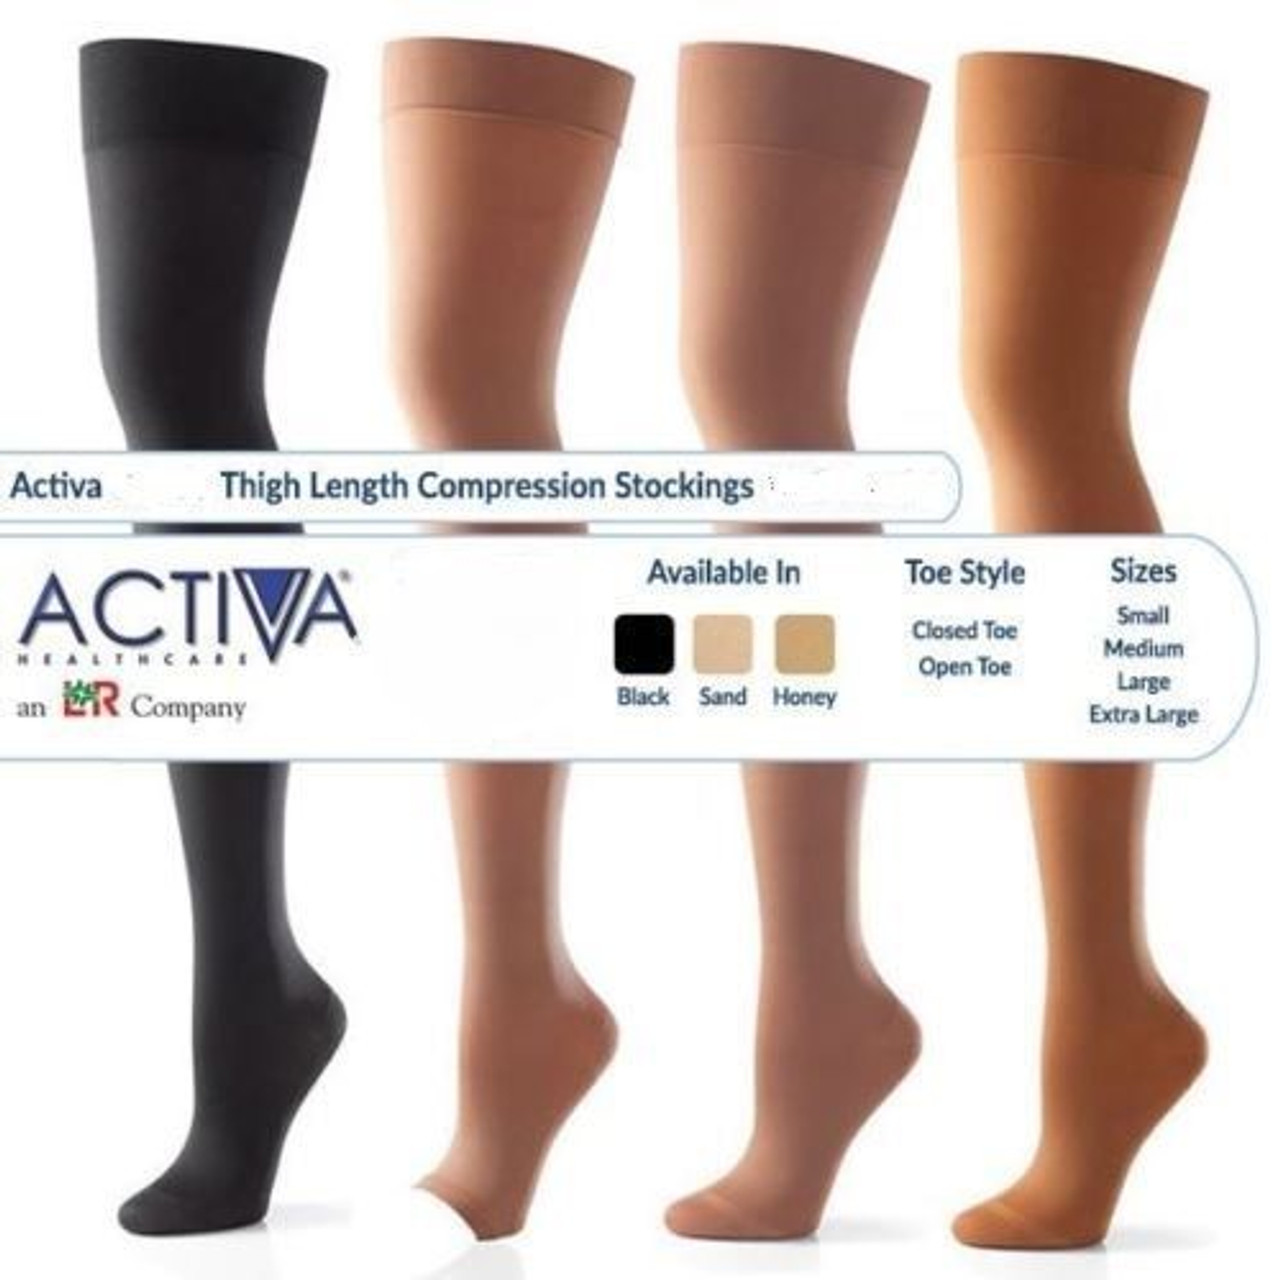 Activa Compression Hosiery Stockings Above Knee Thigh Length Class 1 2 And 3 Medicaldressings